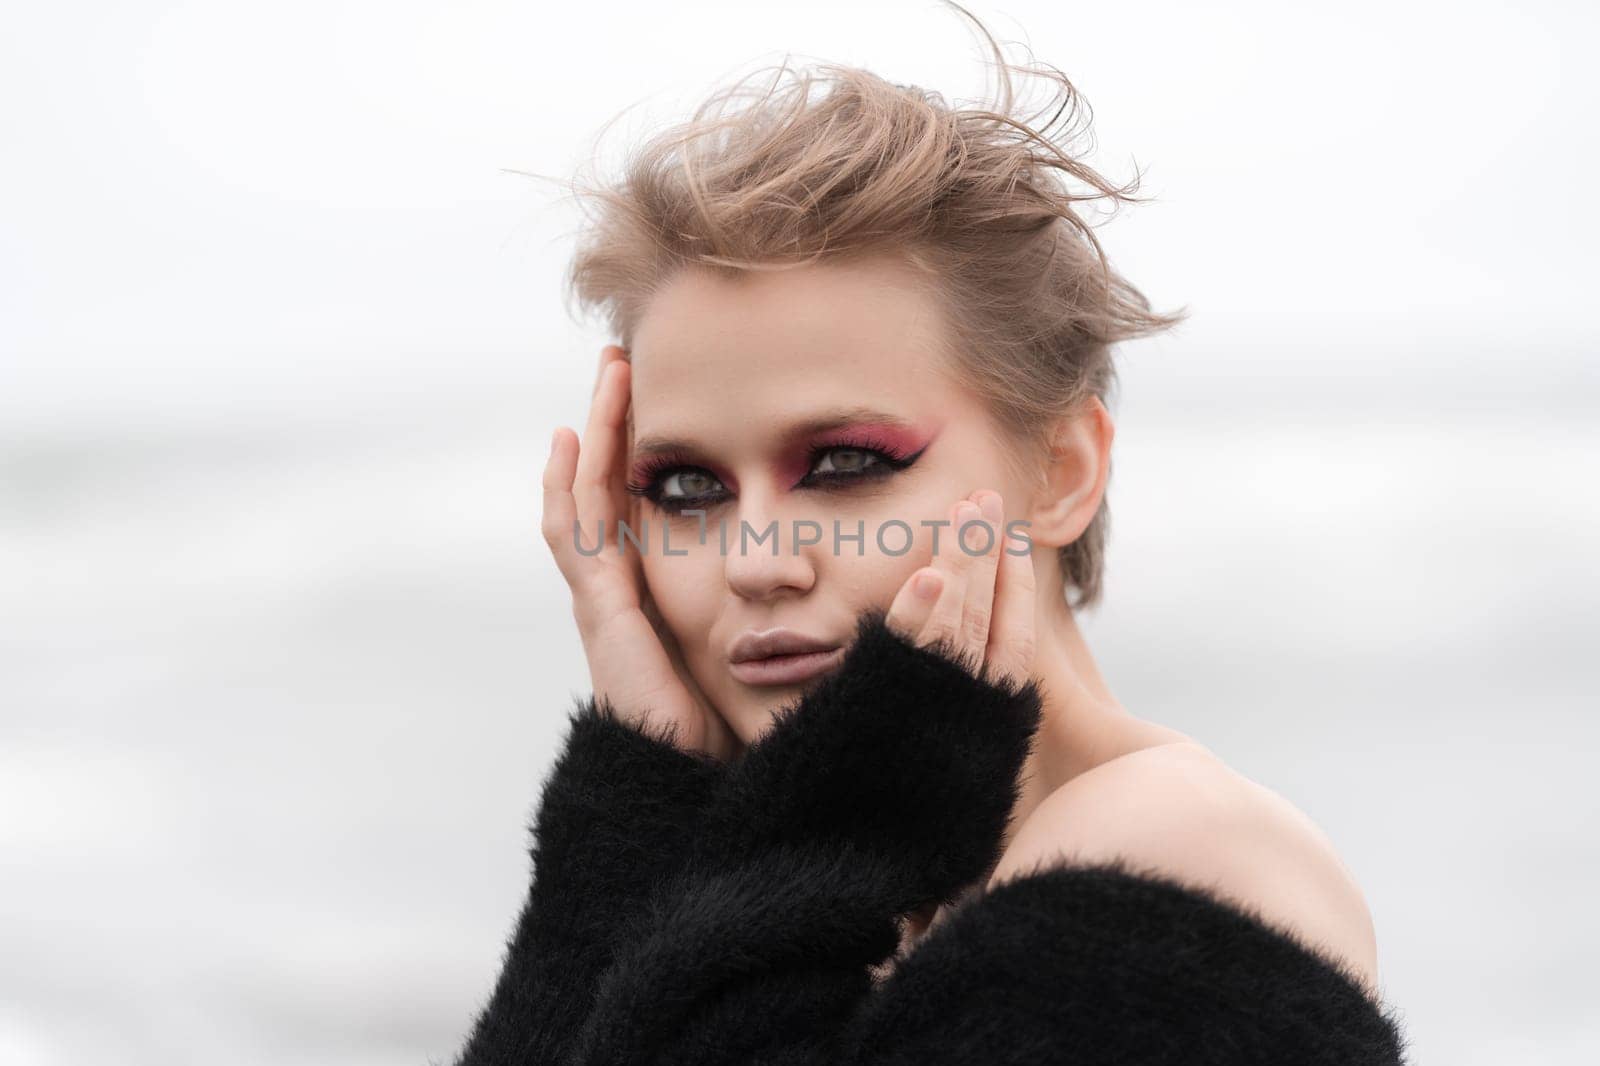 Blonde woman posing outside against white natural background and her bright makeup really makes her stand out. Sensuality woman looking at camera with head in hands and looks absolutely stunning